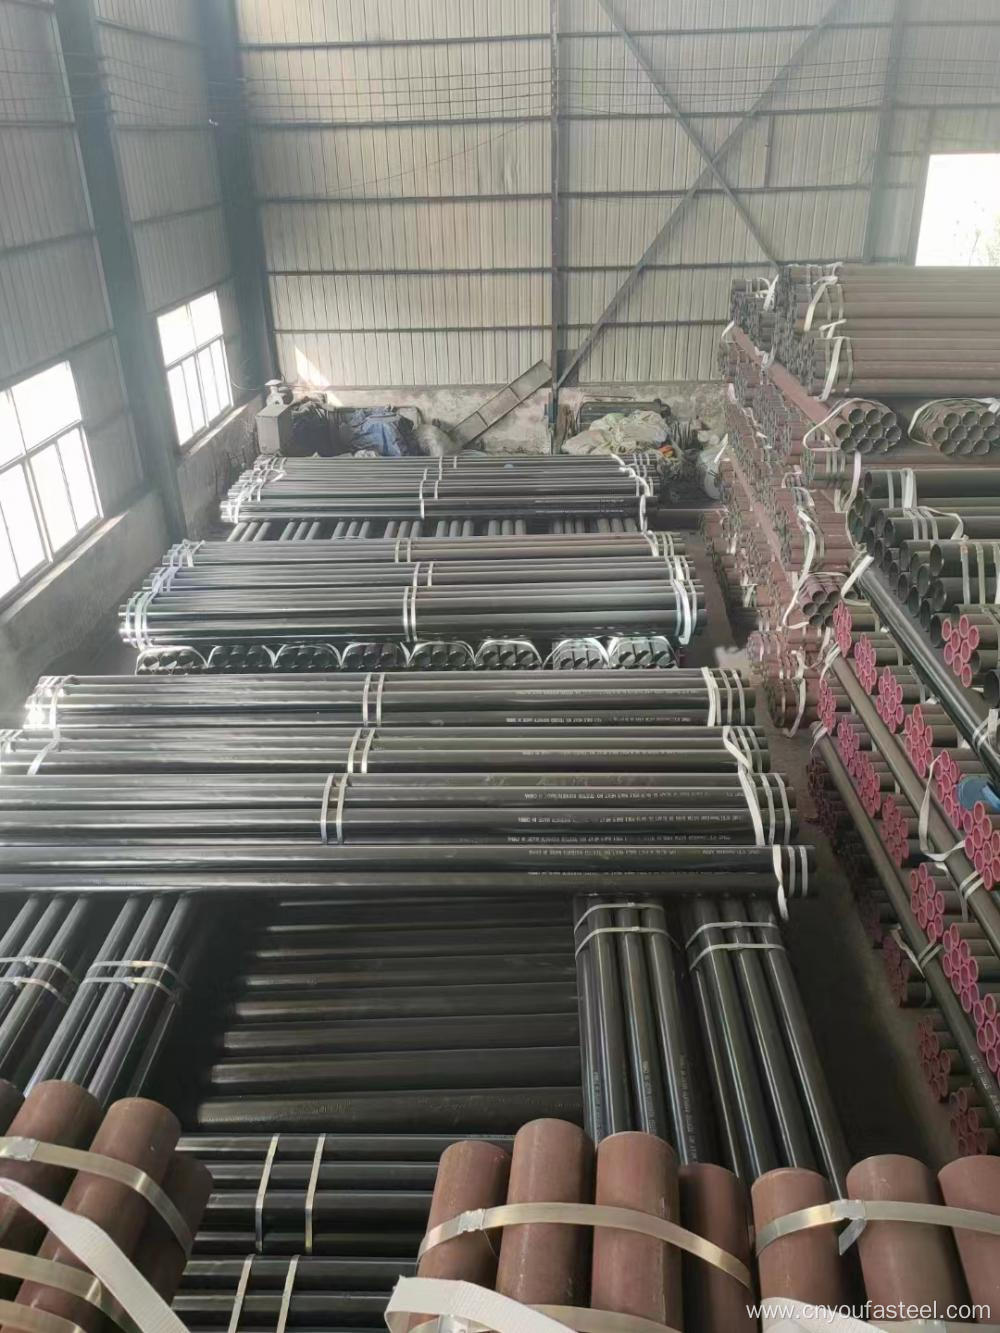 API 5L Gr.X65 Line Pipe for Oil Project